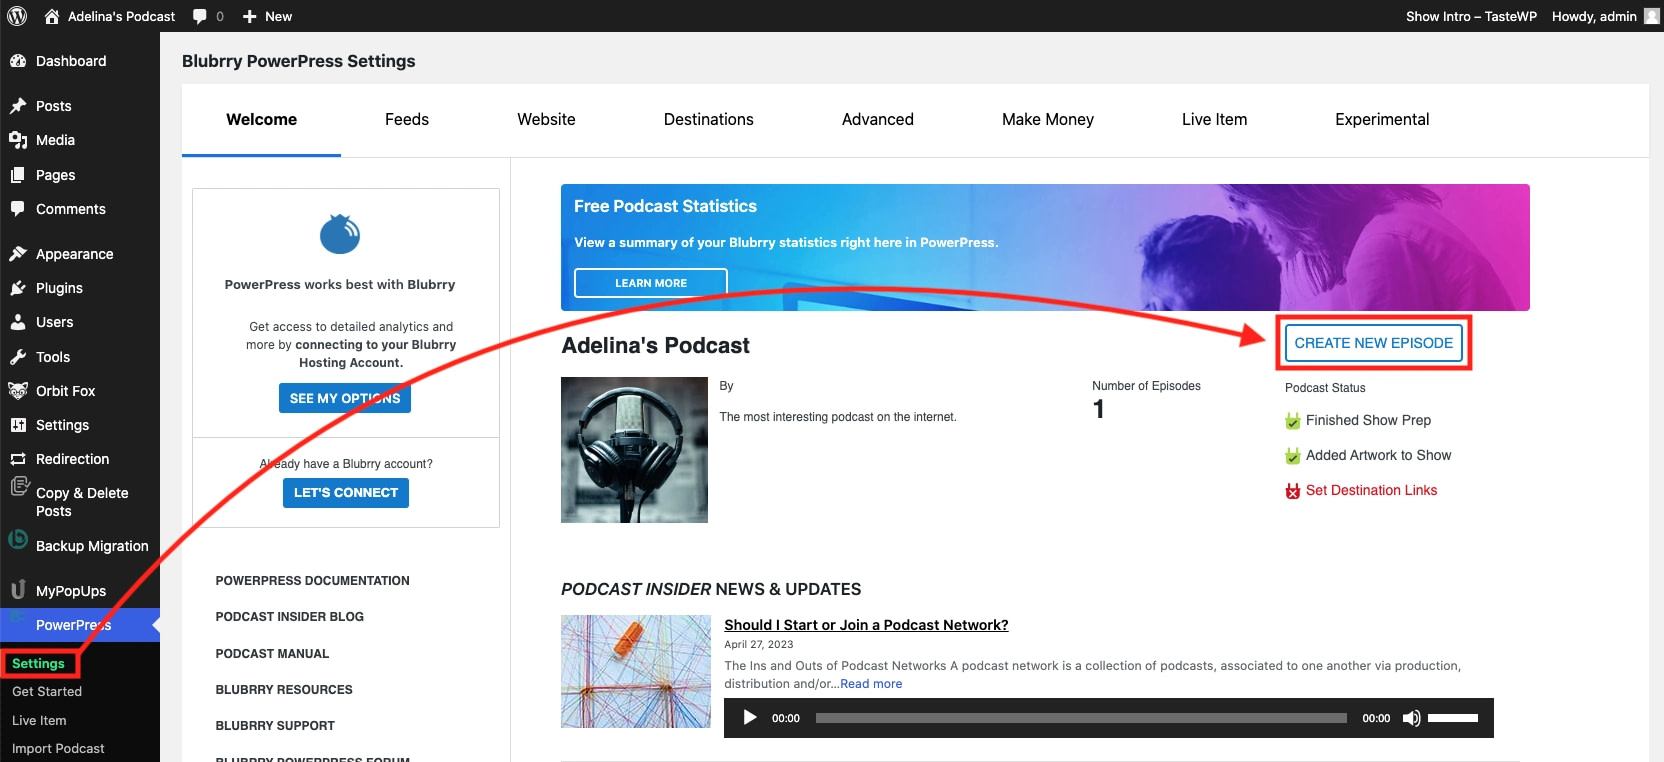 Access the create a new podcast episode option from the WordPress admin dashboard